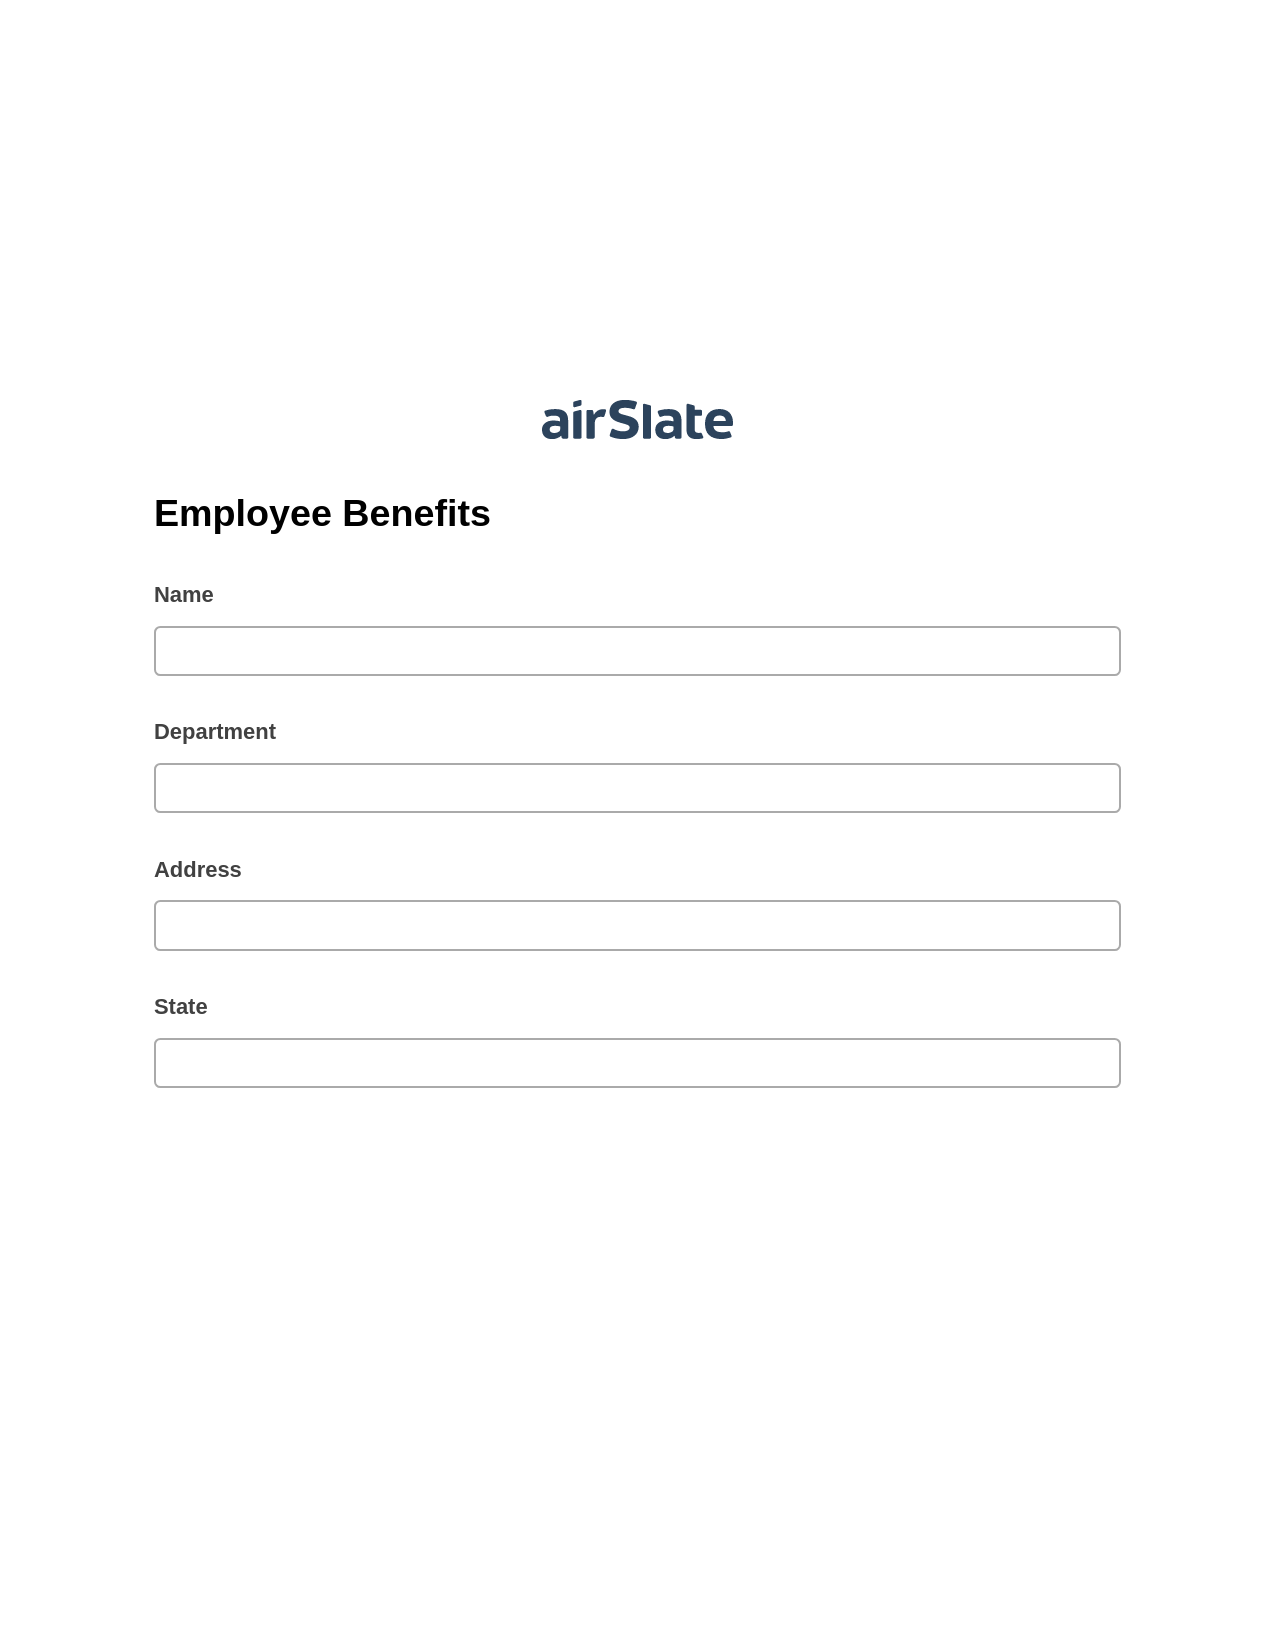 Multirole Employee Benefits Pre-fill from NetSuite Records Bot, Audit Trail Bot, Export to Google Sheet Bot